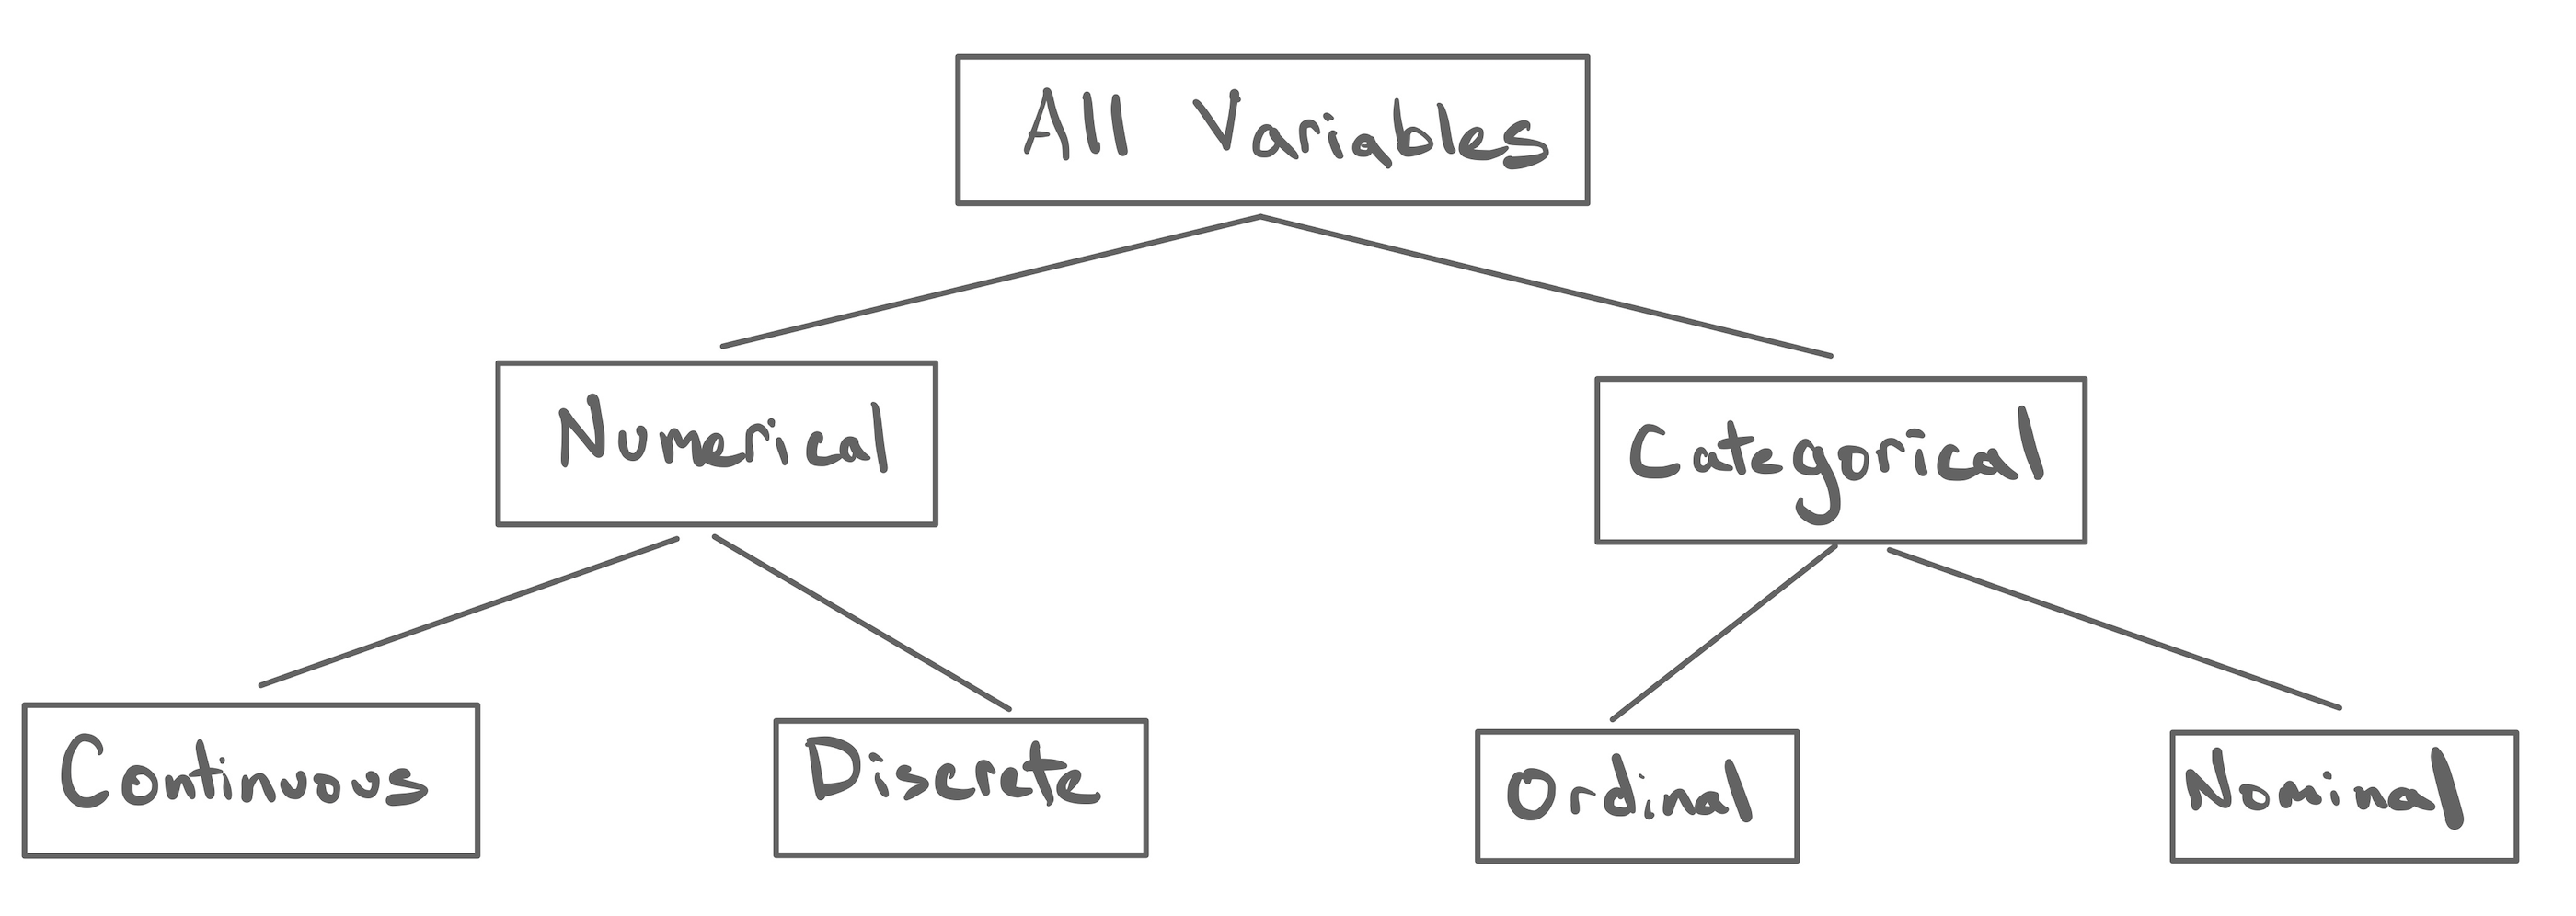 The Taxonomy of Data, showing the two main branches of numerical categorical variables. Numerical varibles can be split into continuous and discrete variables. Categorical variables can be split into ordinal and nominal variables.